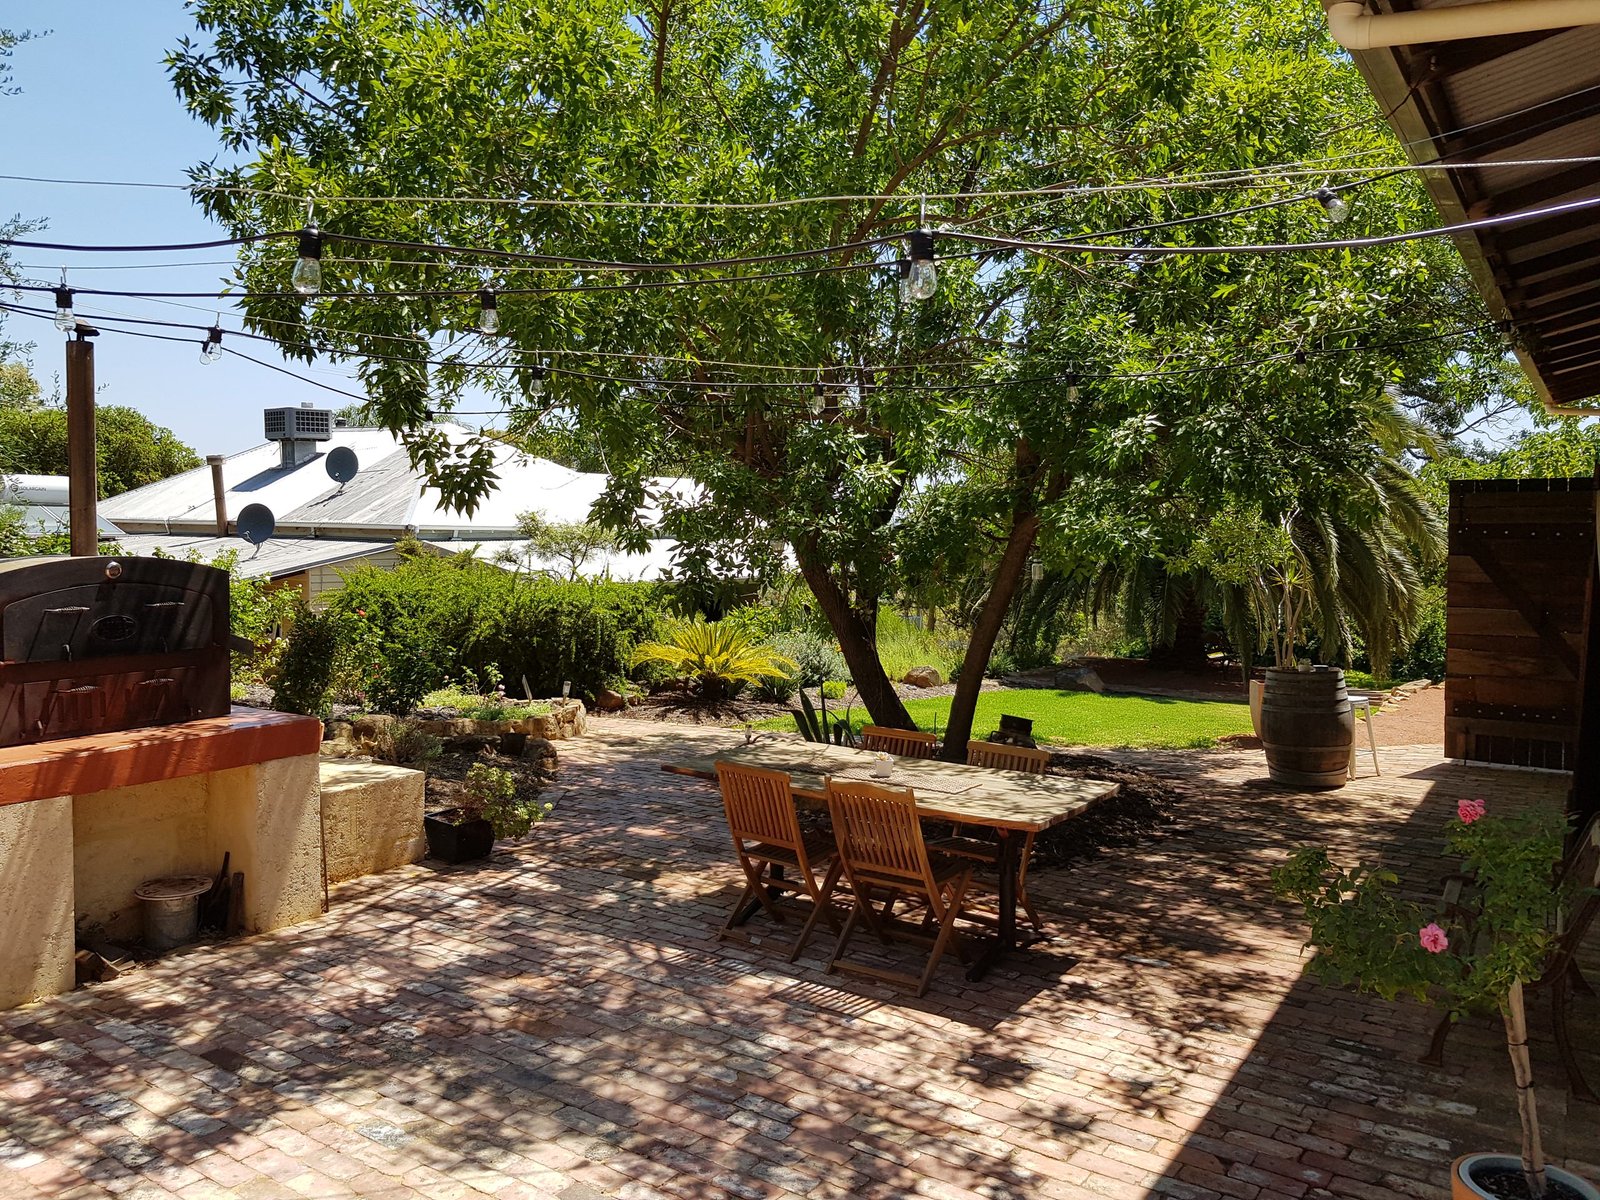 Jarrahdale Courtyard, Rural Landscaping Company Project, Landscaping Perth